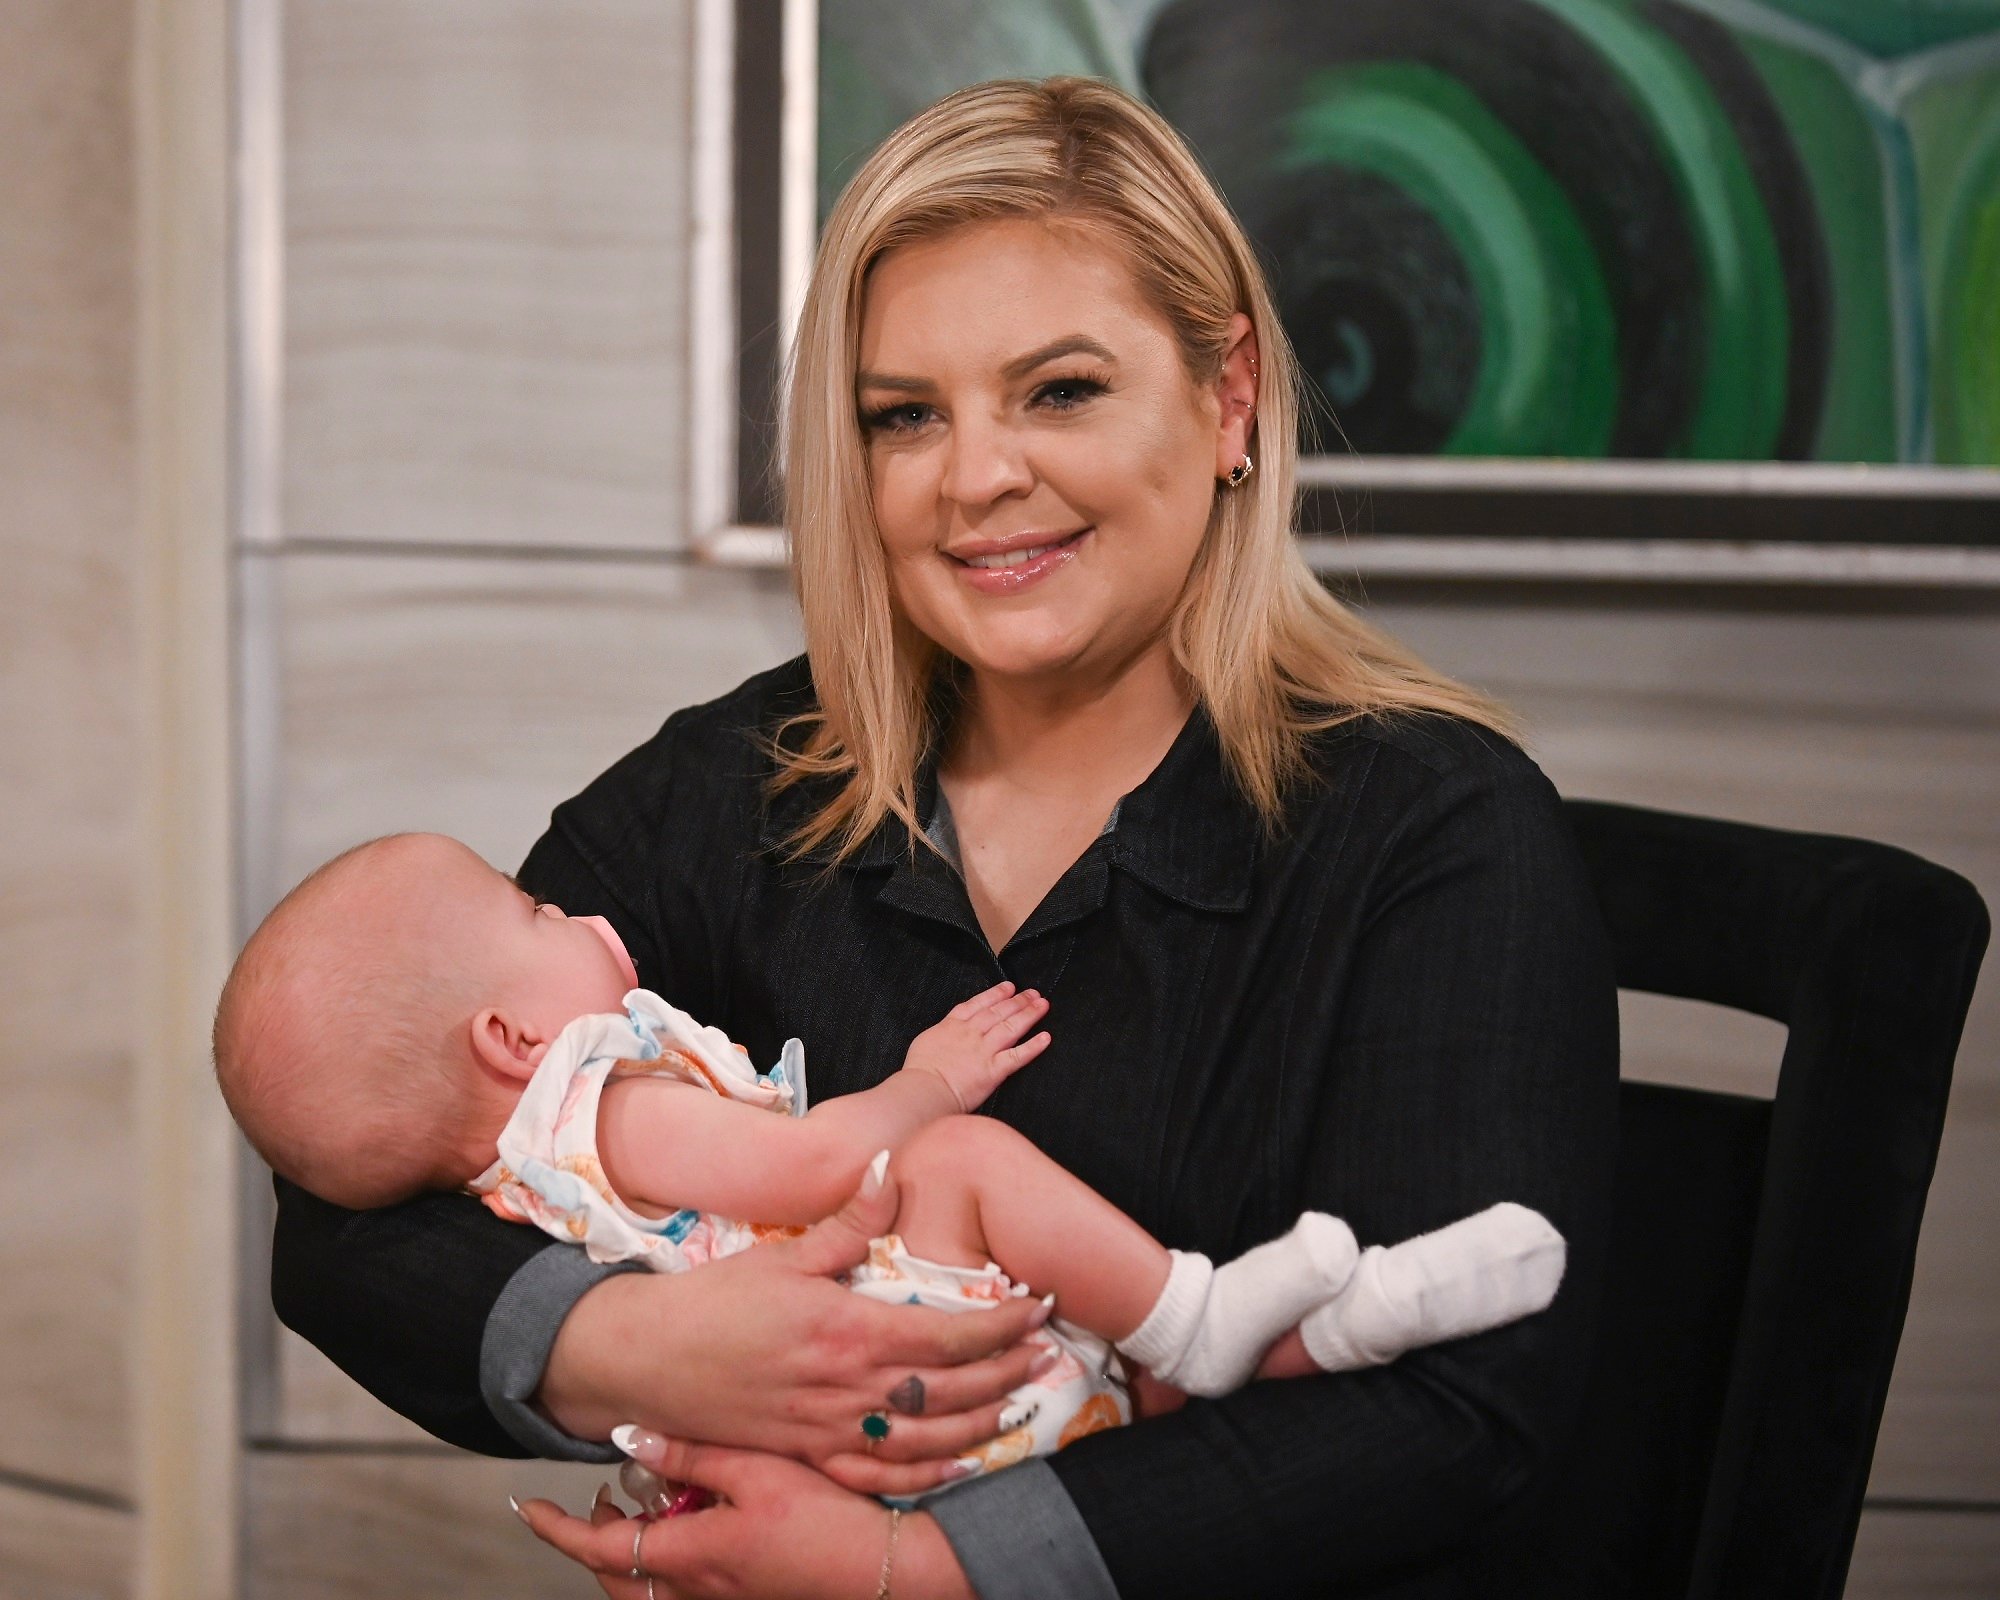 General Hospital speculation focuses on Maxie, pictured here in black and holding a baby